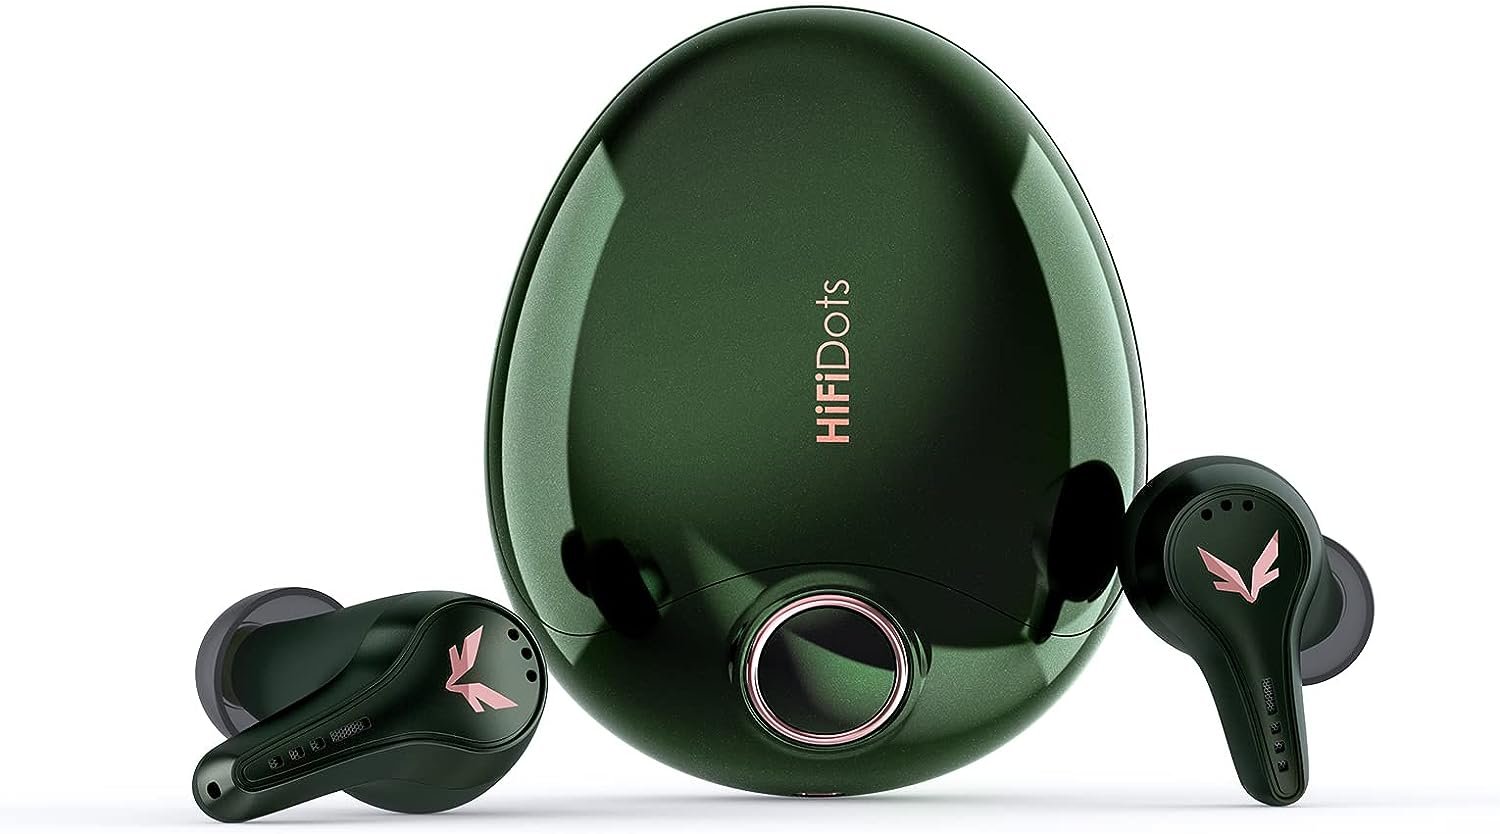 mifo FiiTii HiFiDots Wireless Earbuds Active Noise Cancelling, QC 3071 aptX Lossless Sound Bluetooth Earbuds with APP for Custom EQ, Bluetooth 5.3 Earphones Wireless, IPX7 Waterproof Small Earbuds